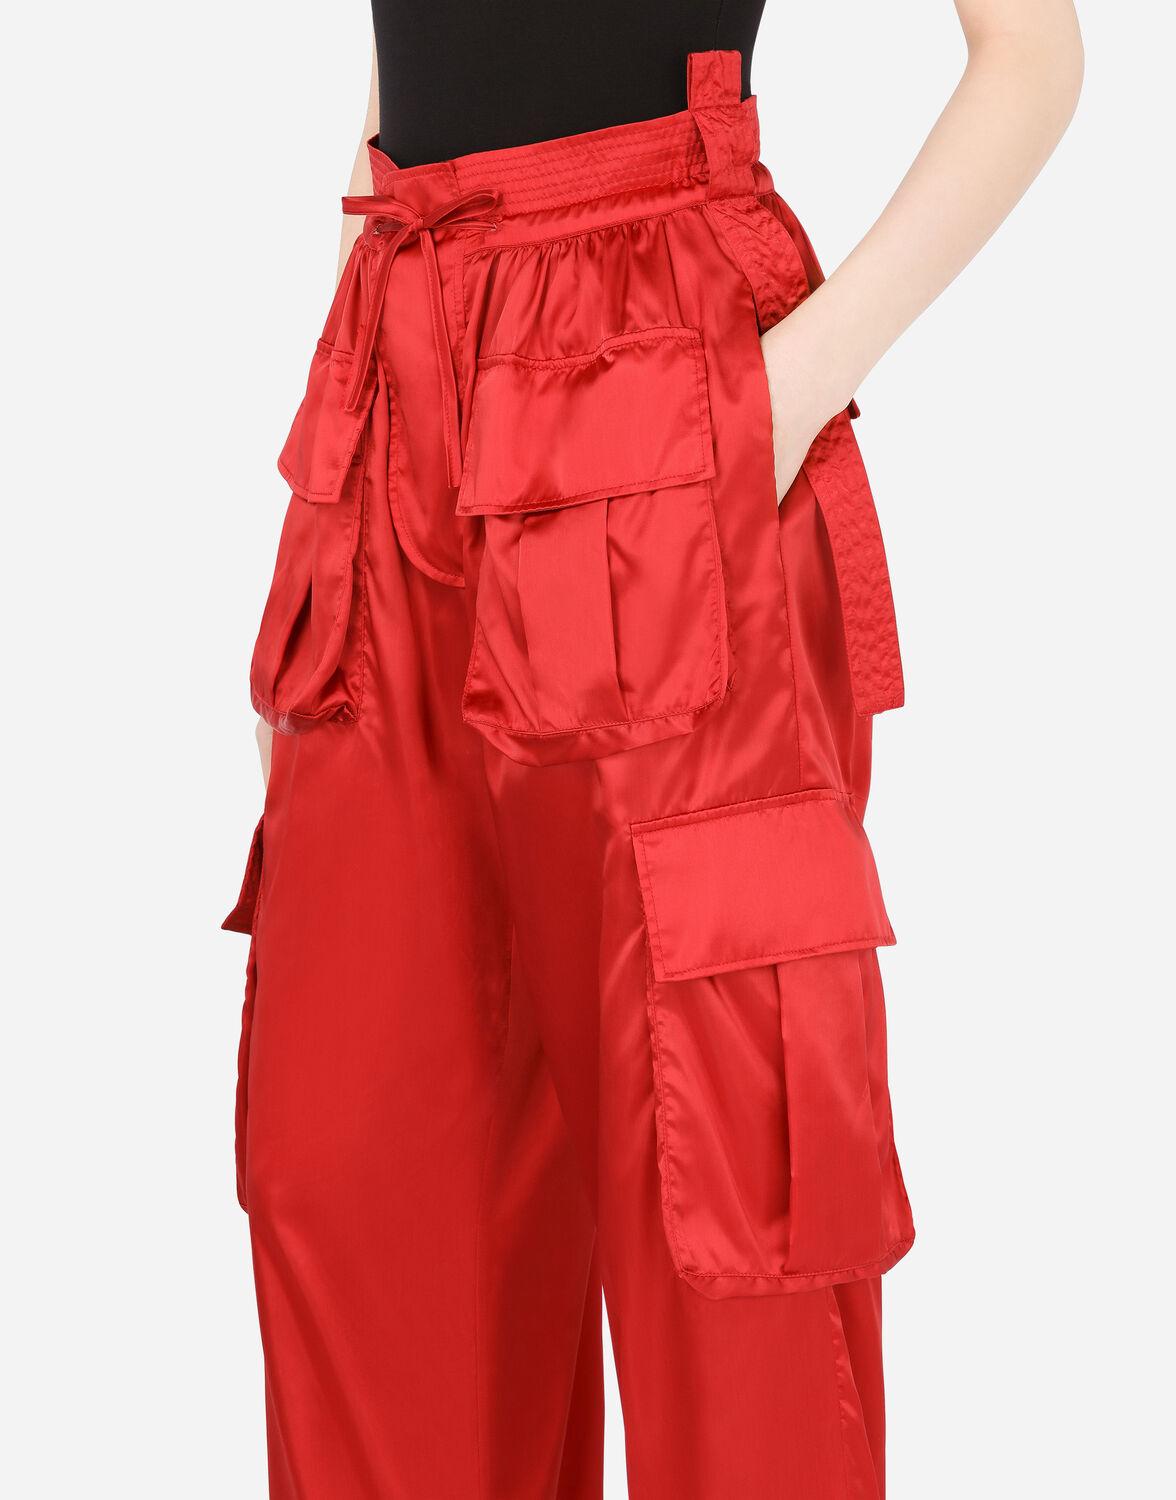 Dolce & Gabbana Satin Cargo Pants in Red | Lyst